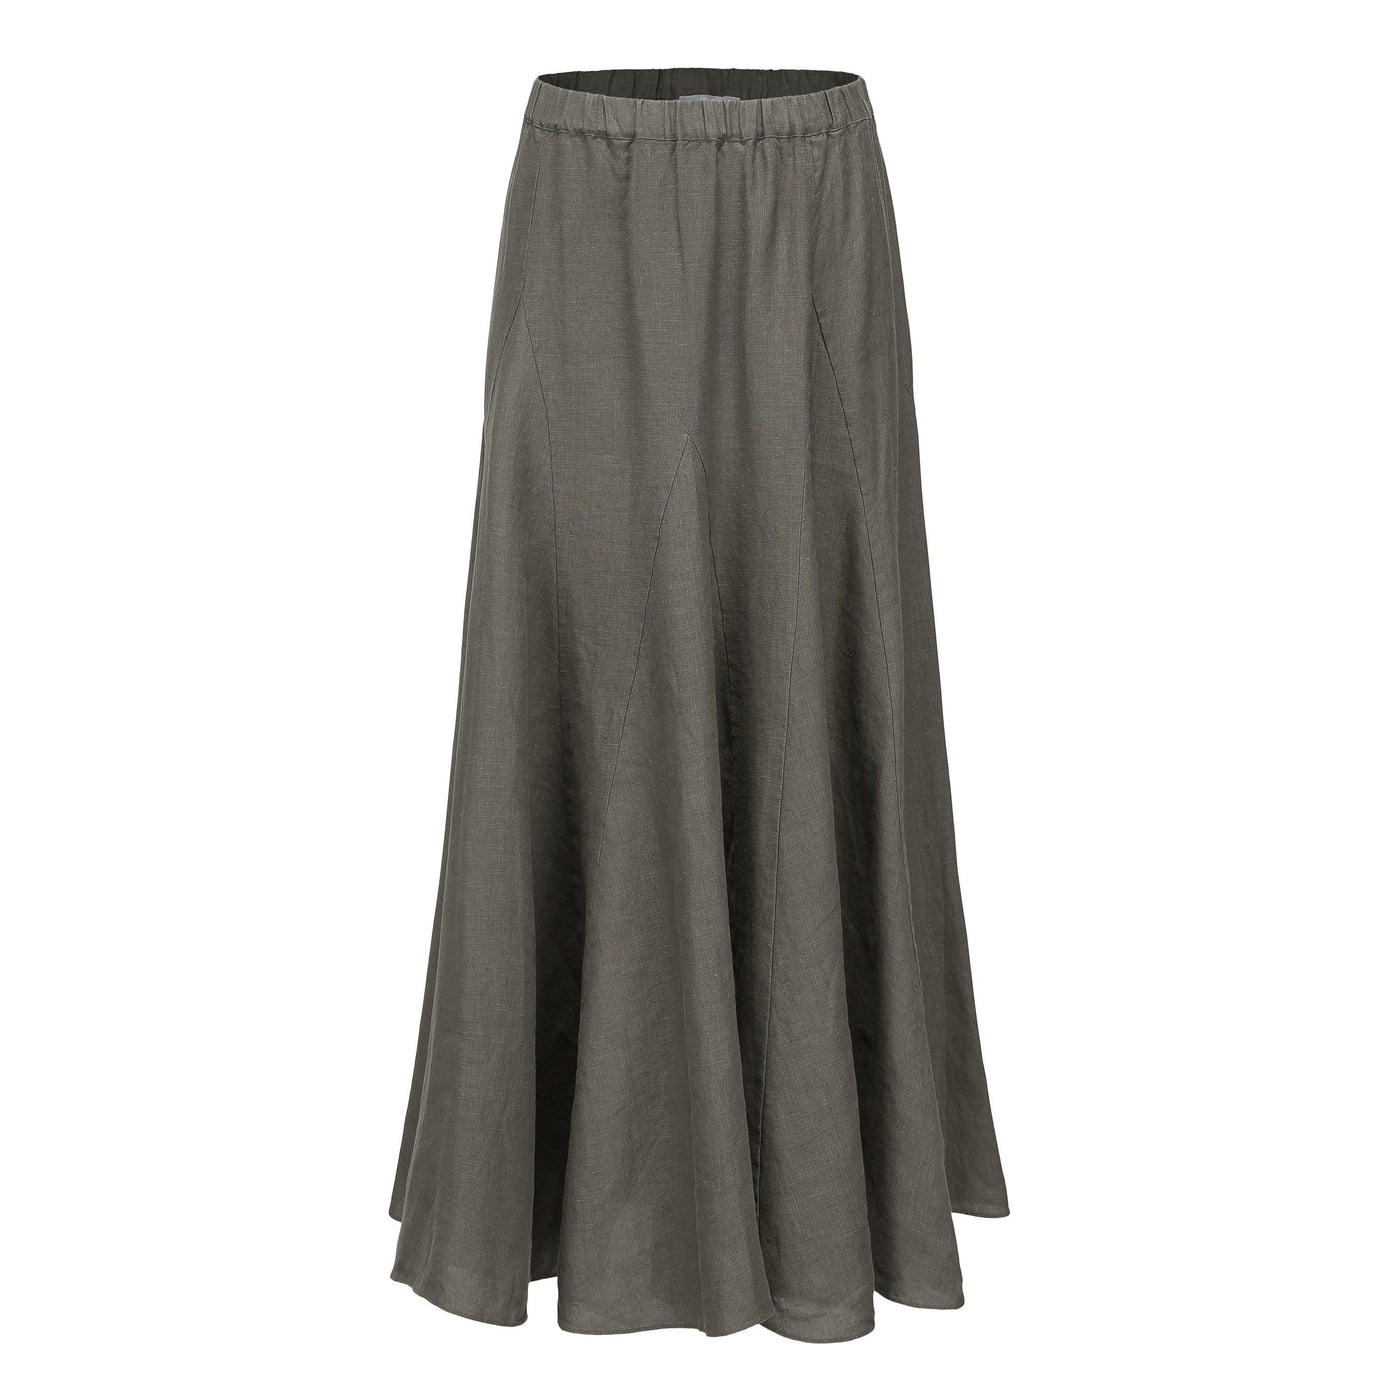 Lilly Pilly Collection 100% organic linen Stella Skirt in Khaki